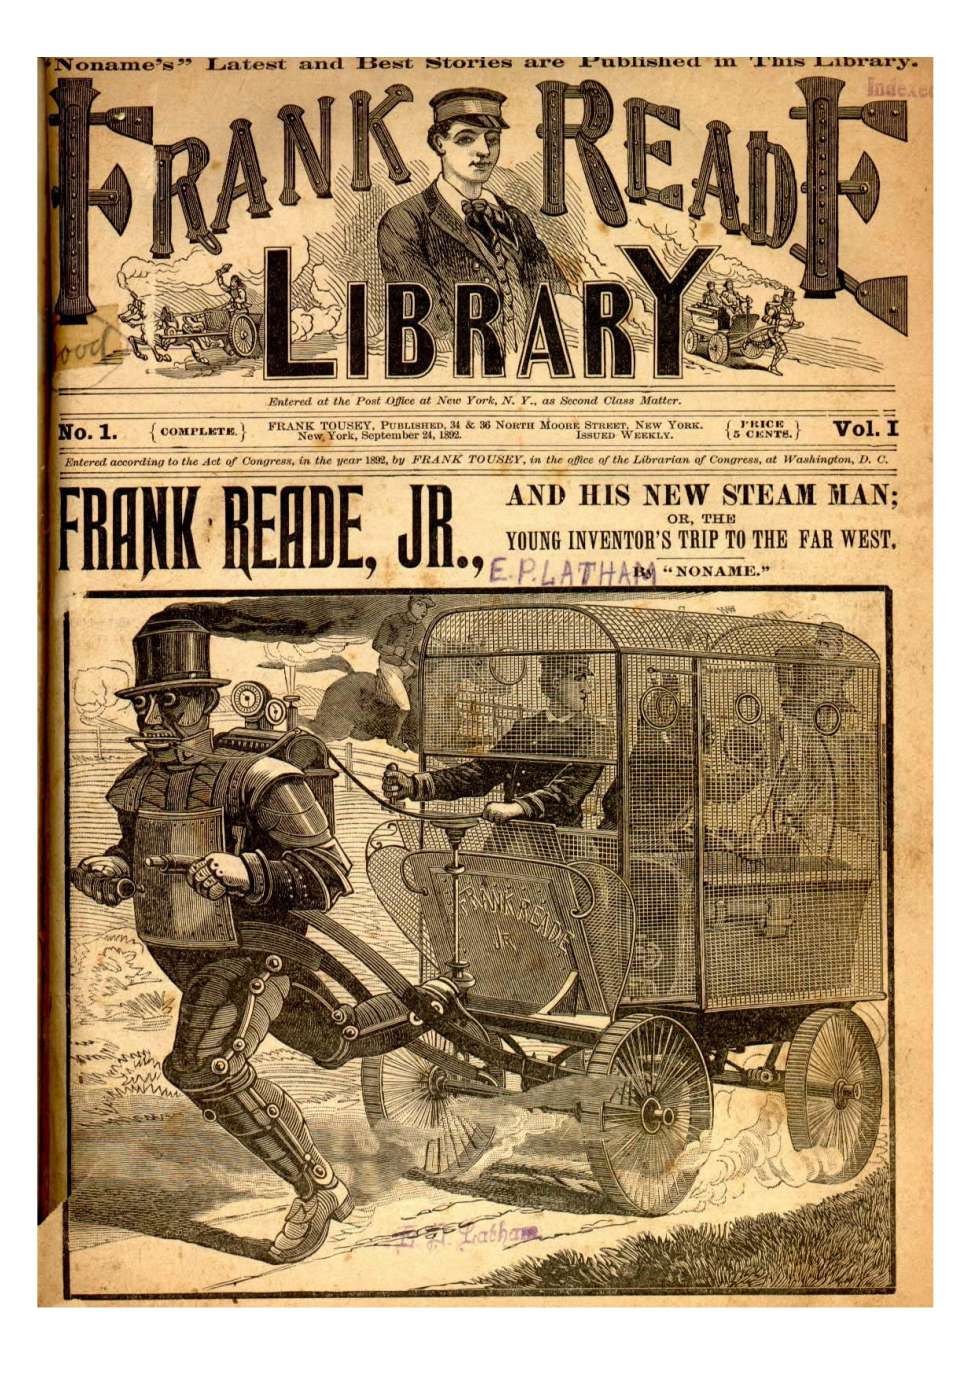 Book Cover For v01 1 - Frank Reade Jr. and His New Steam Man (alt)